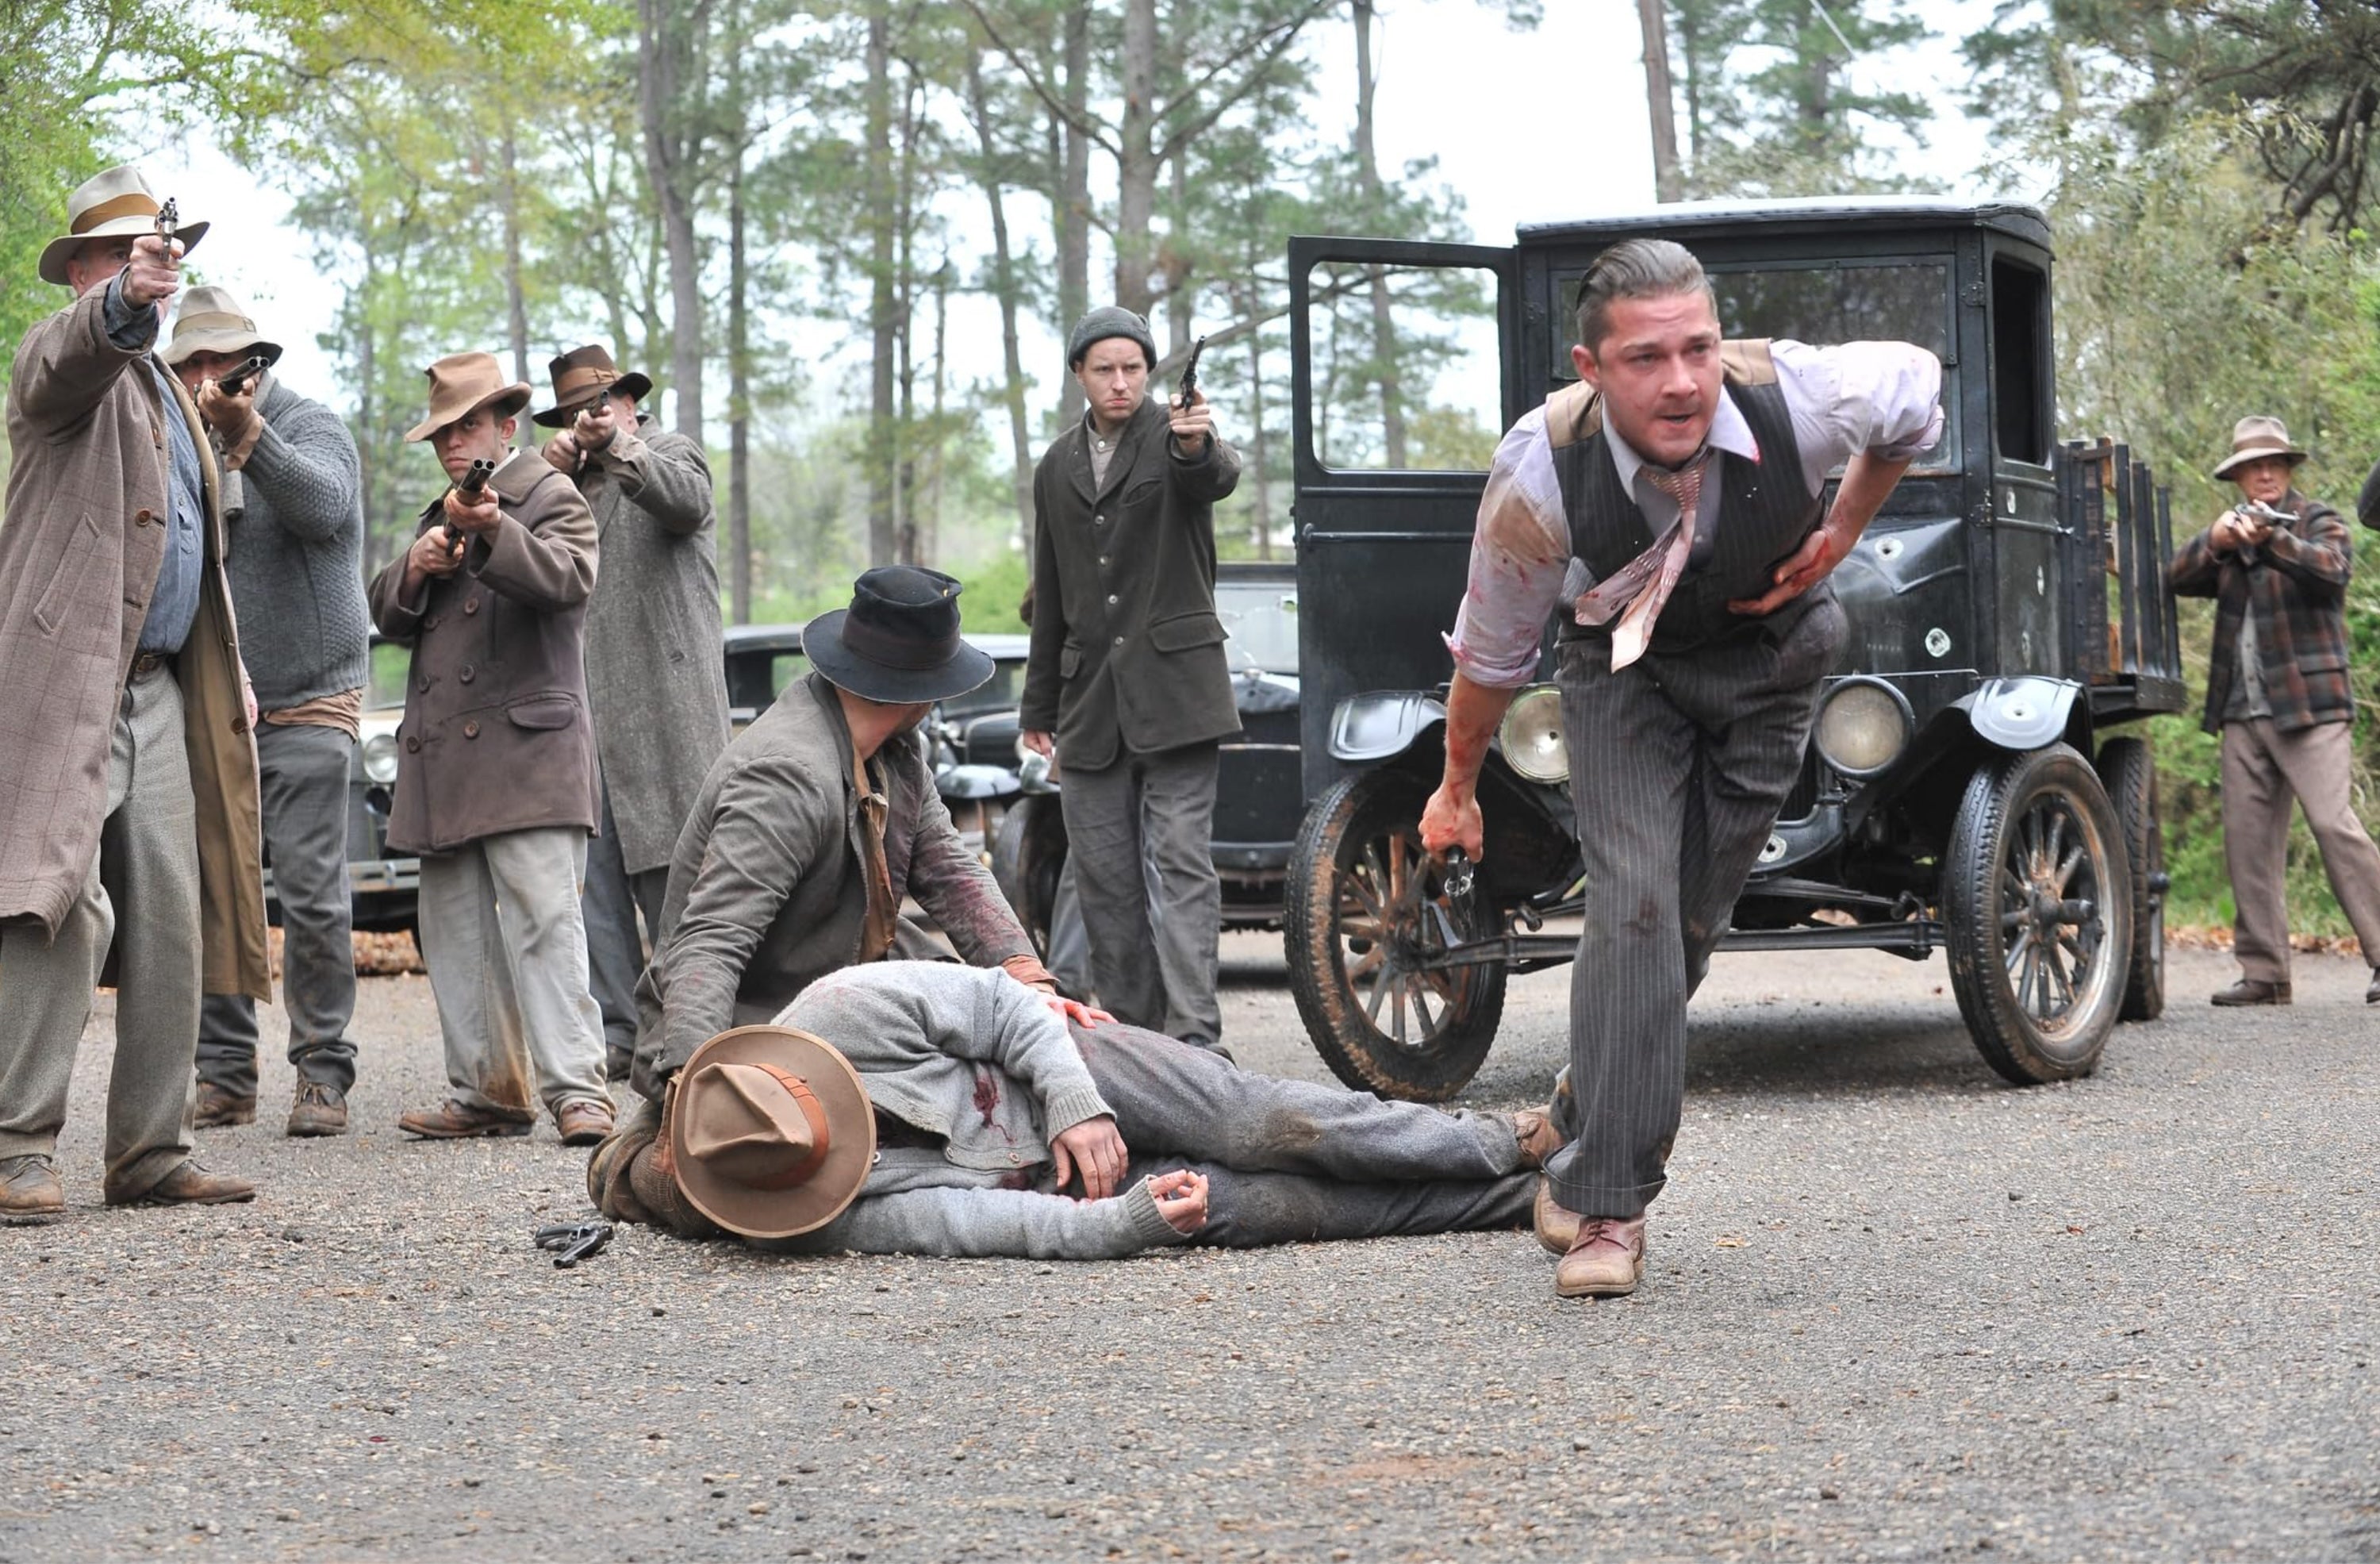 Image from the movie Lawless adapted from the book The Wettest County in the World